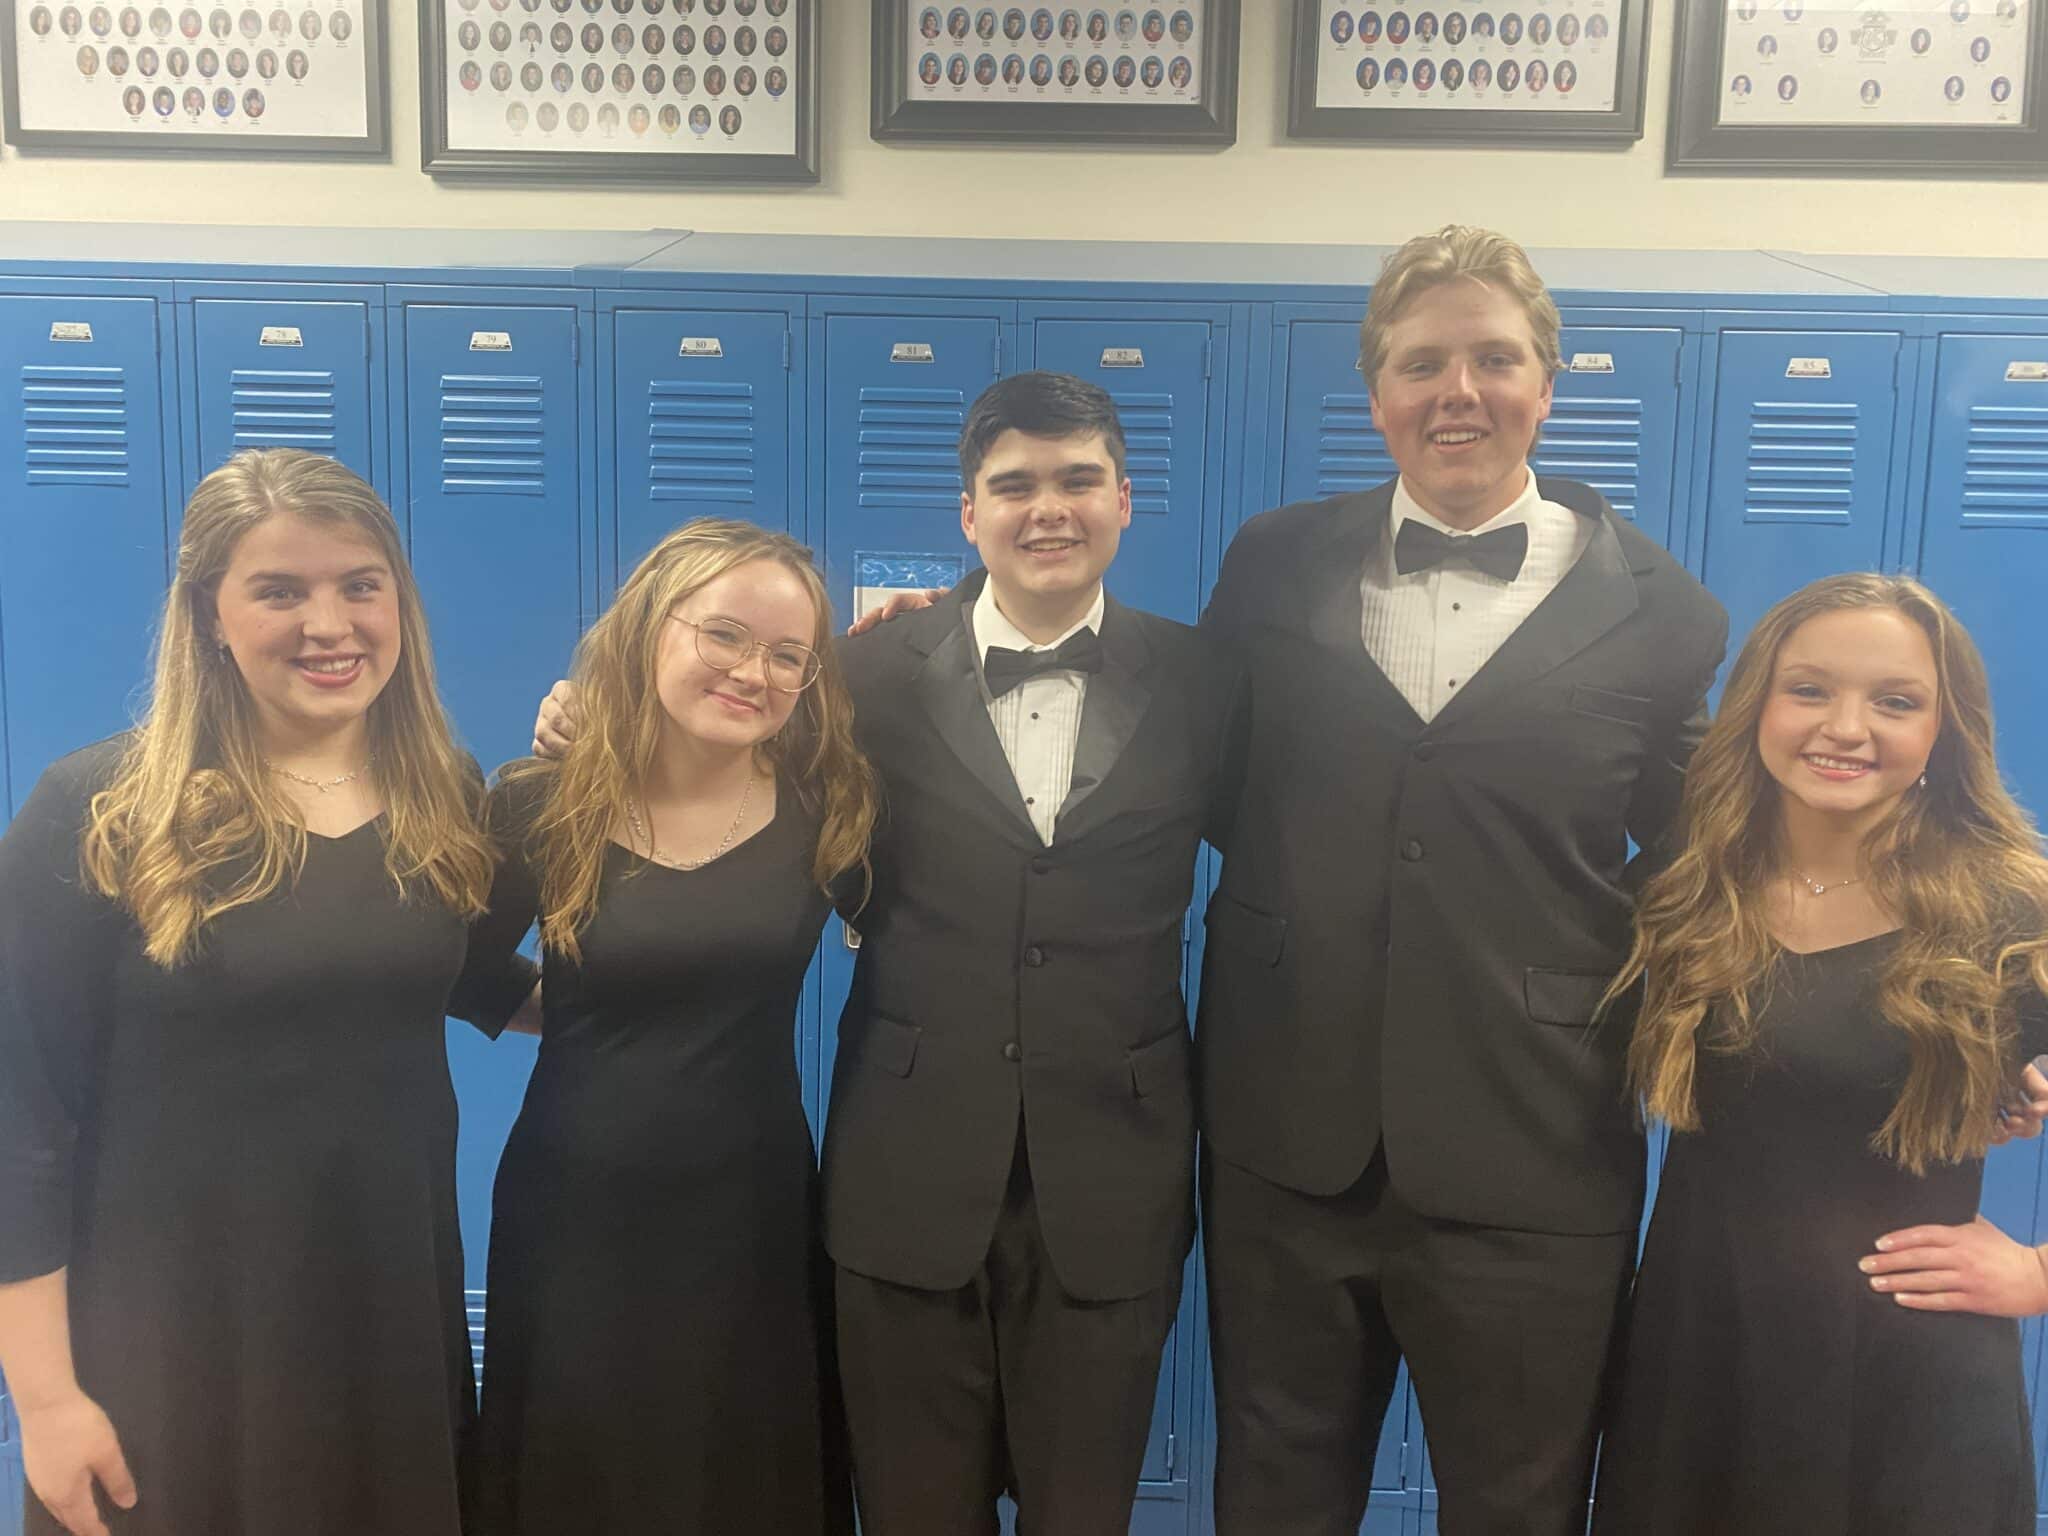 Juniors Emma Coats, Addison Davies and George Hoelzel and seniors Hunter Harris and Hannah Wyssmann all received a gold rating for their vocal solos at the MSHSAA State Music Festival.